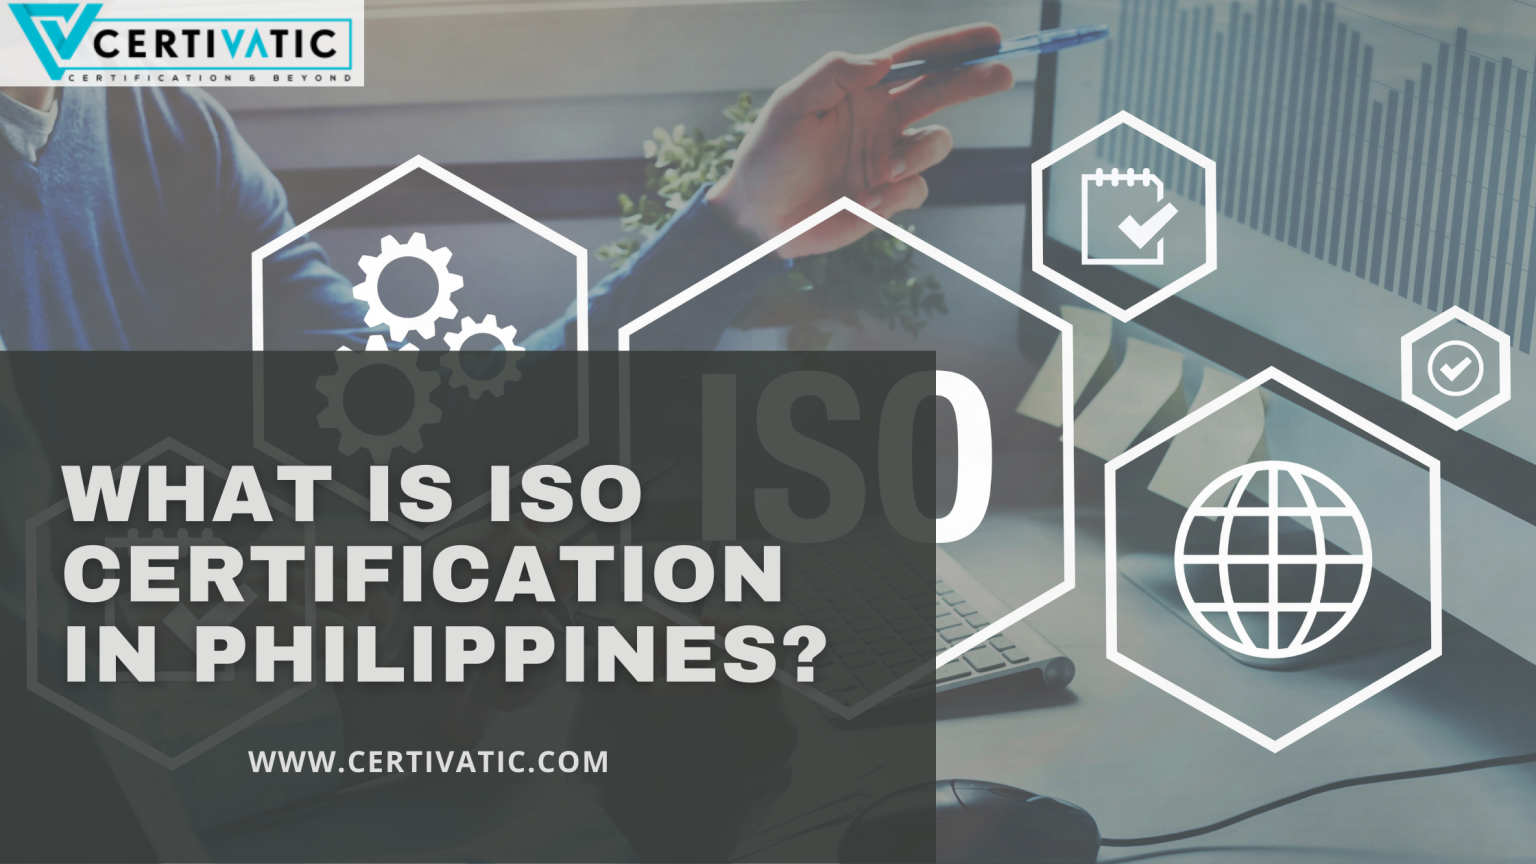 What is ISO Certification in Philippines? ISO Certification